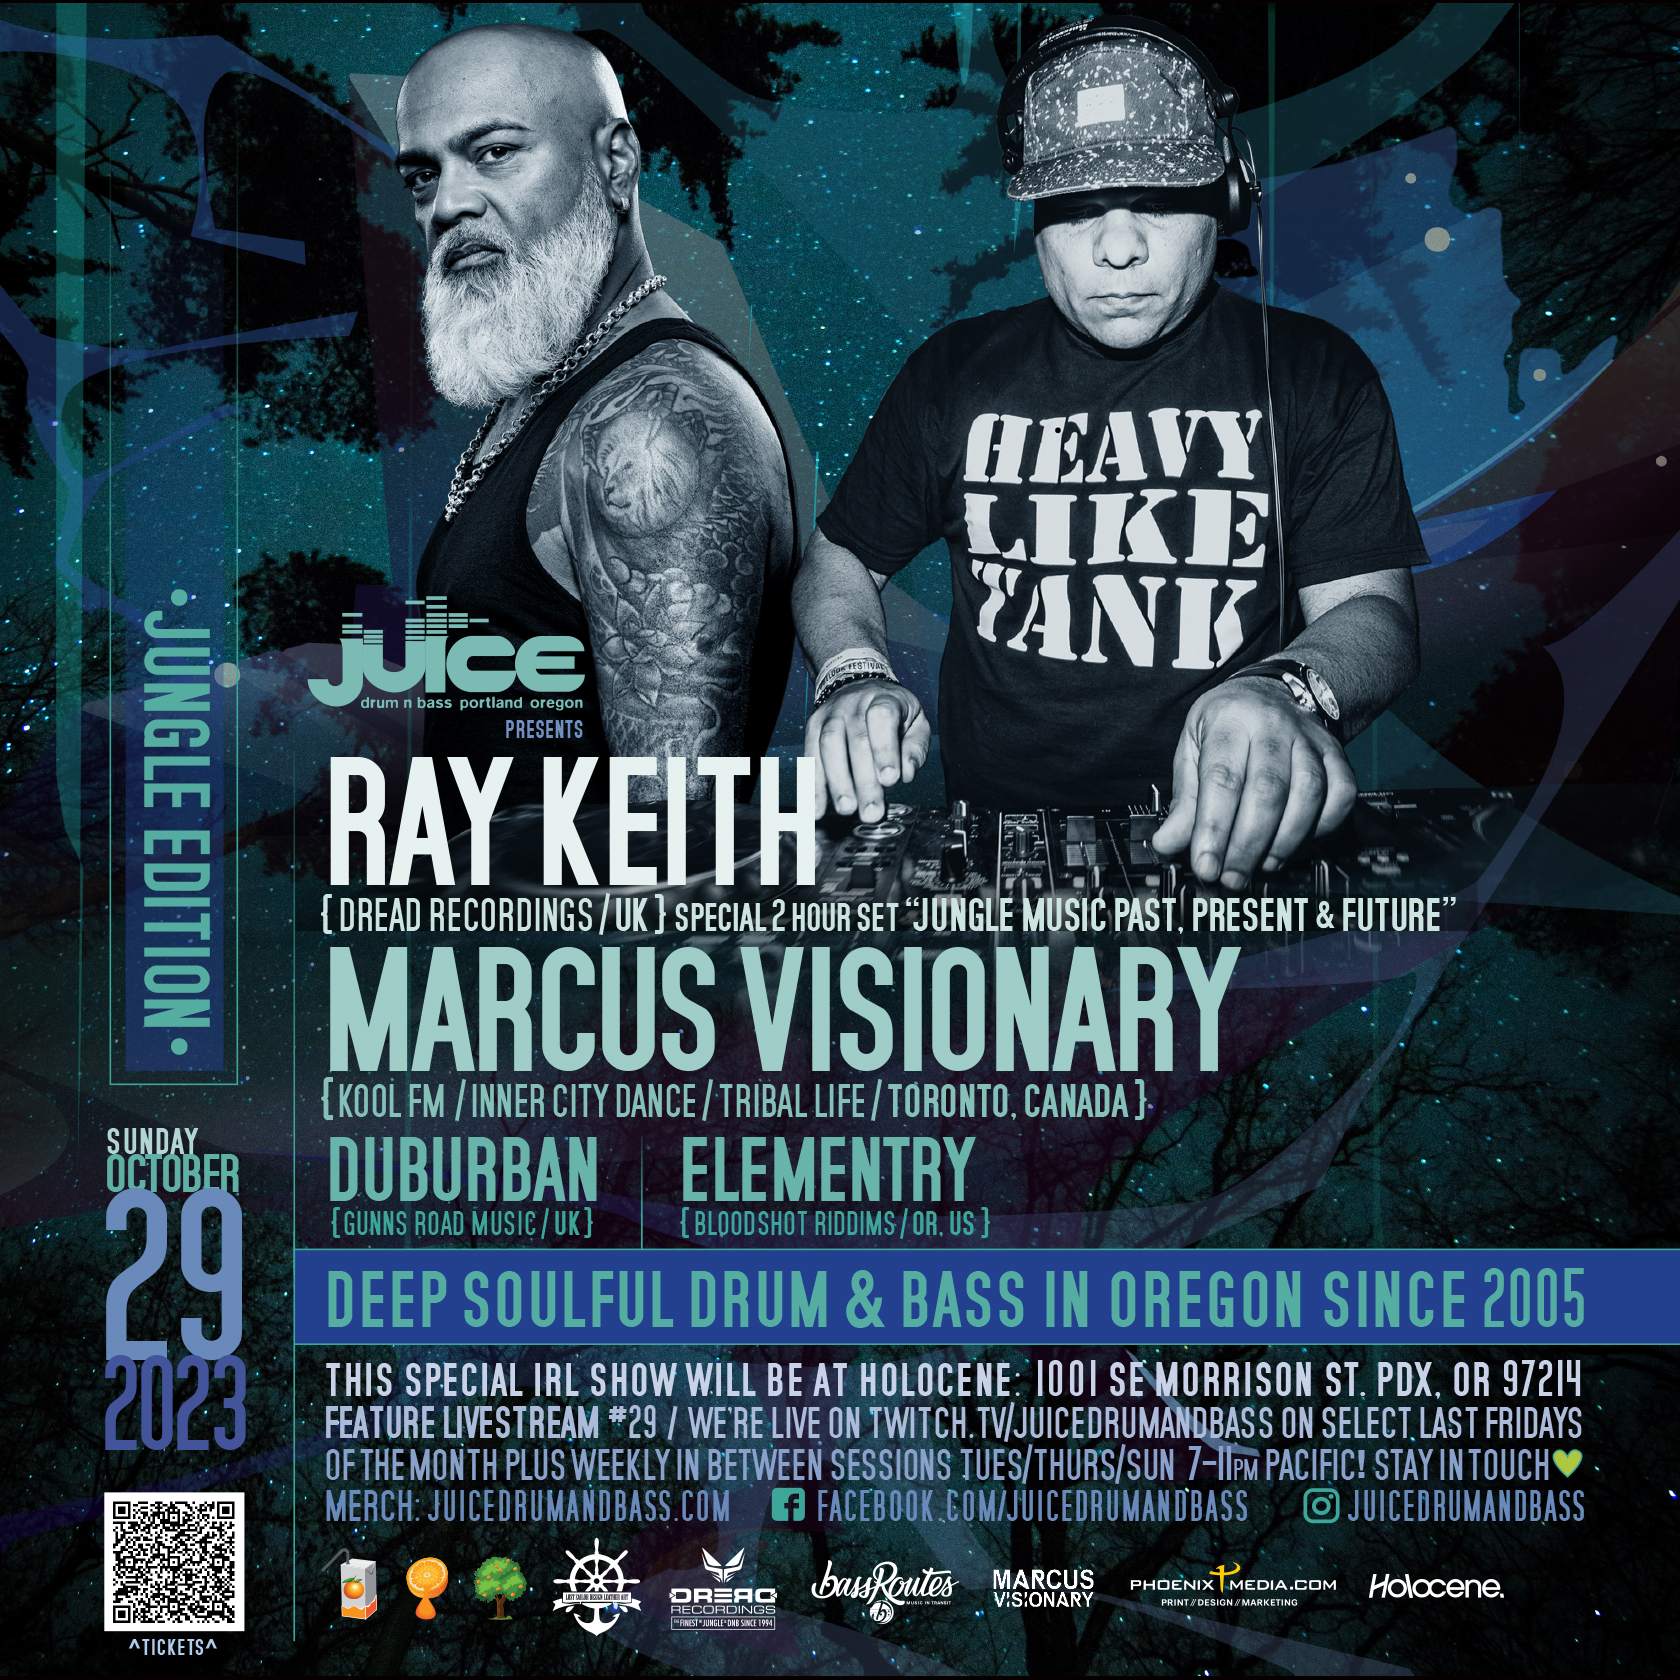 10/29 JUICE DnB Jungle Edition: Ray Keith-UK, Marcus Visionary-TO, Duburban-UK, Elementry-PDX - Página frontal